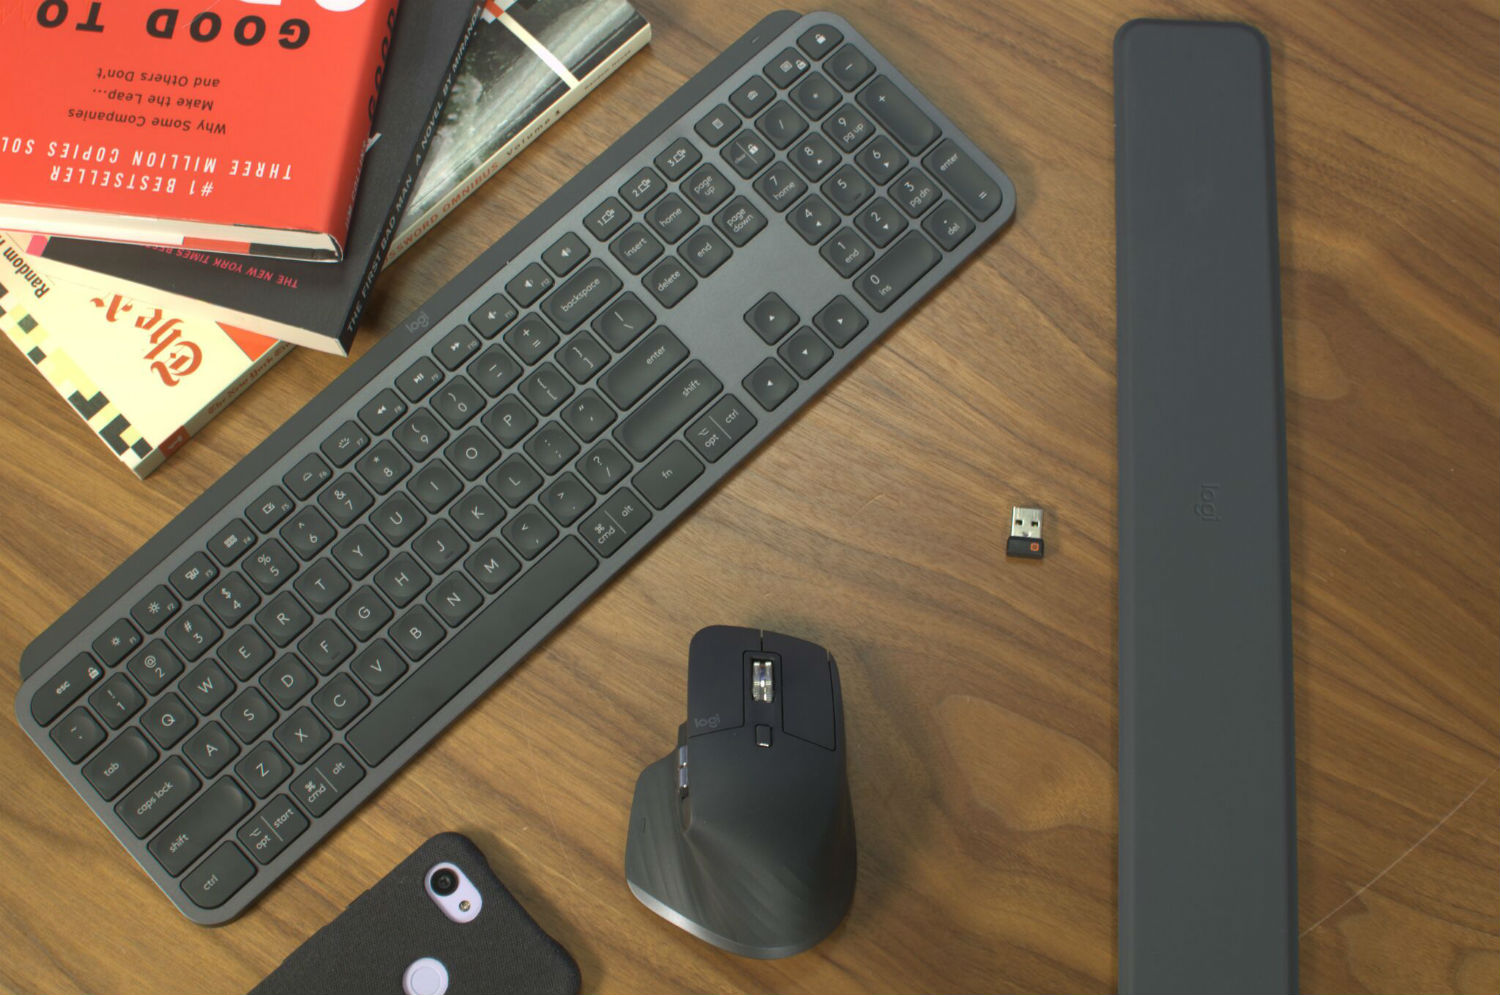 Why We Love the Logitech MX Master 3 Mouse